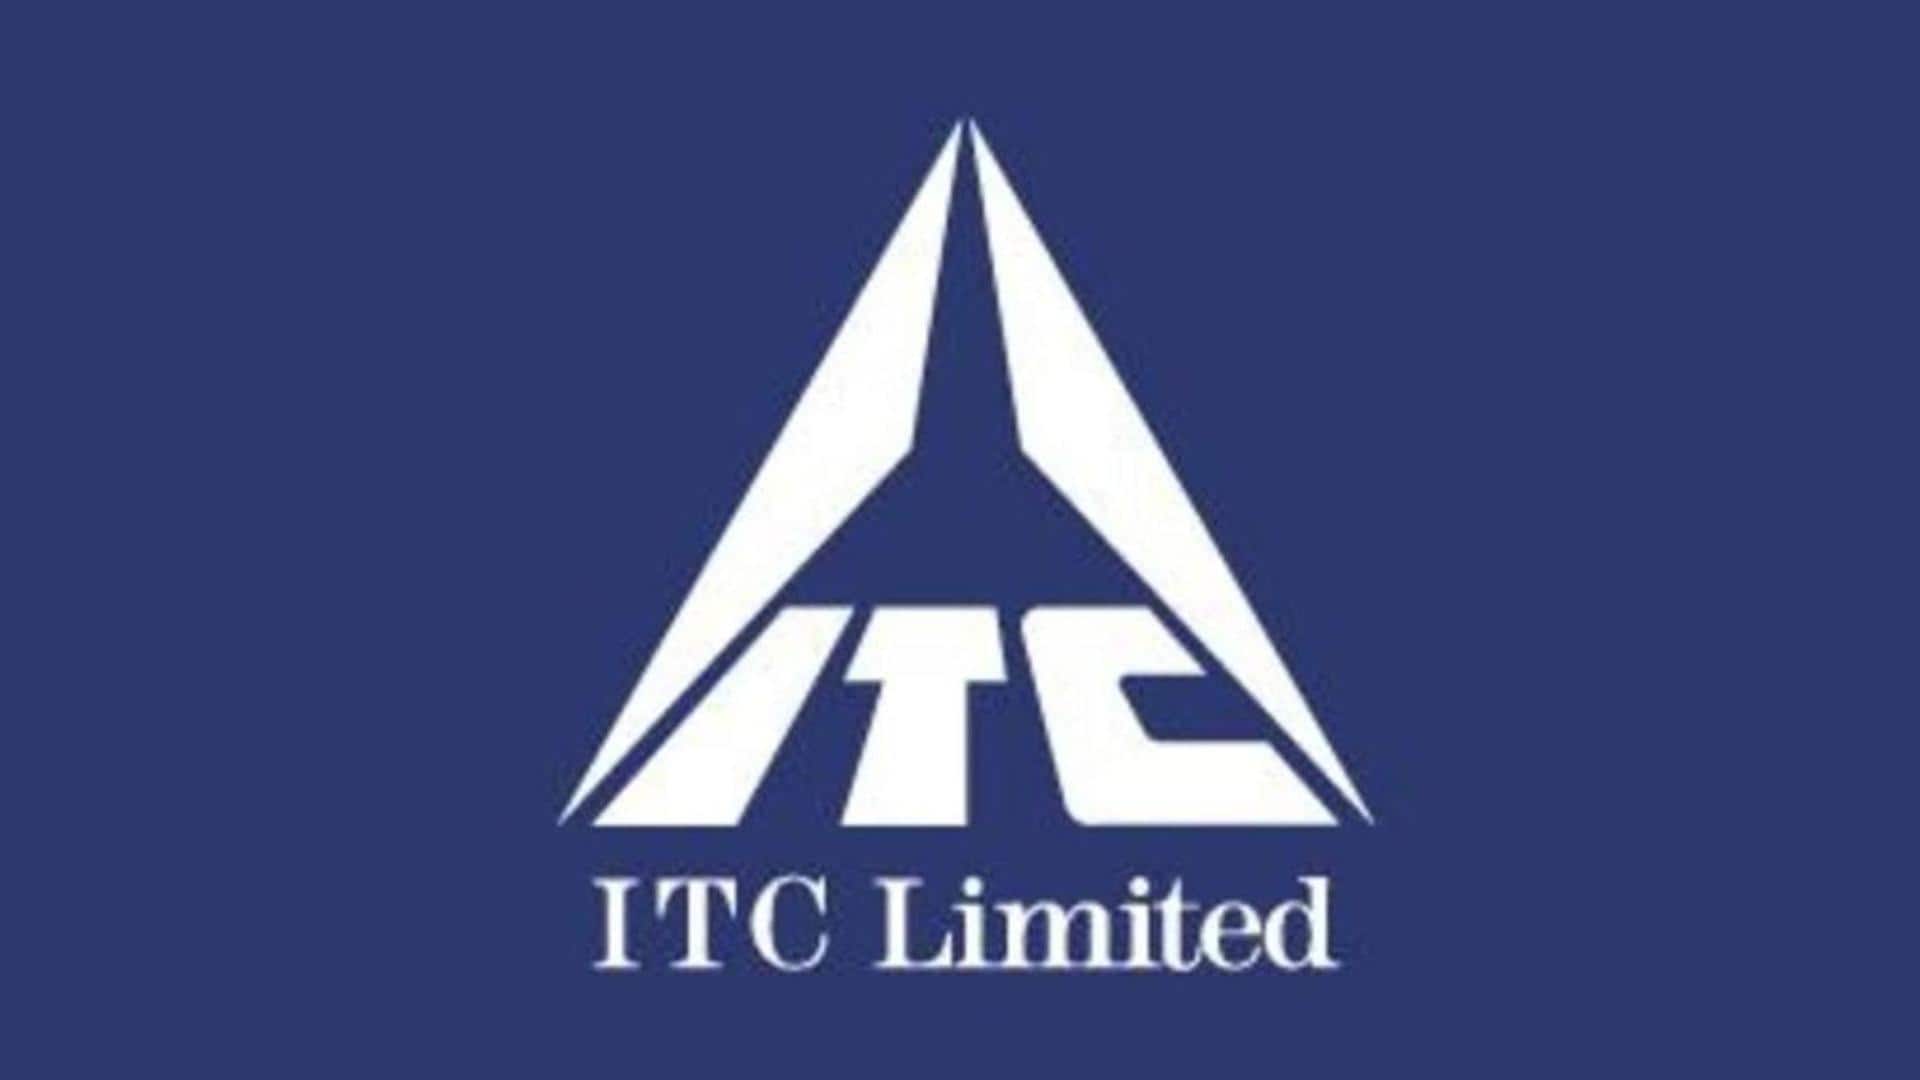 ITC shares reach all-time high ahead of ex-dividend